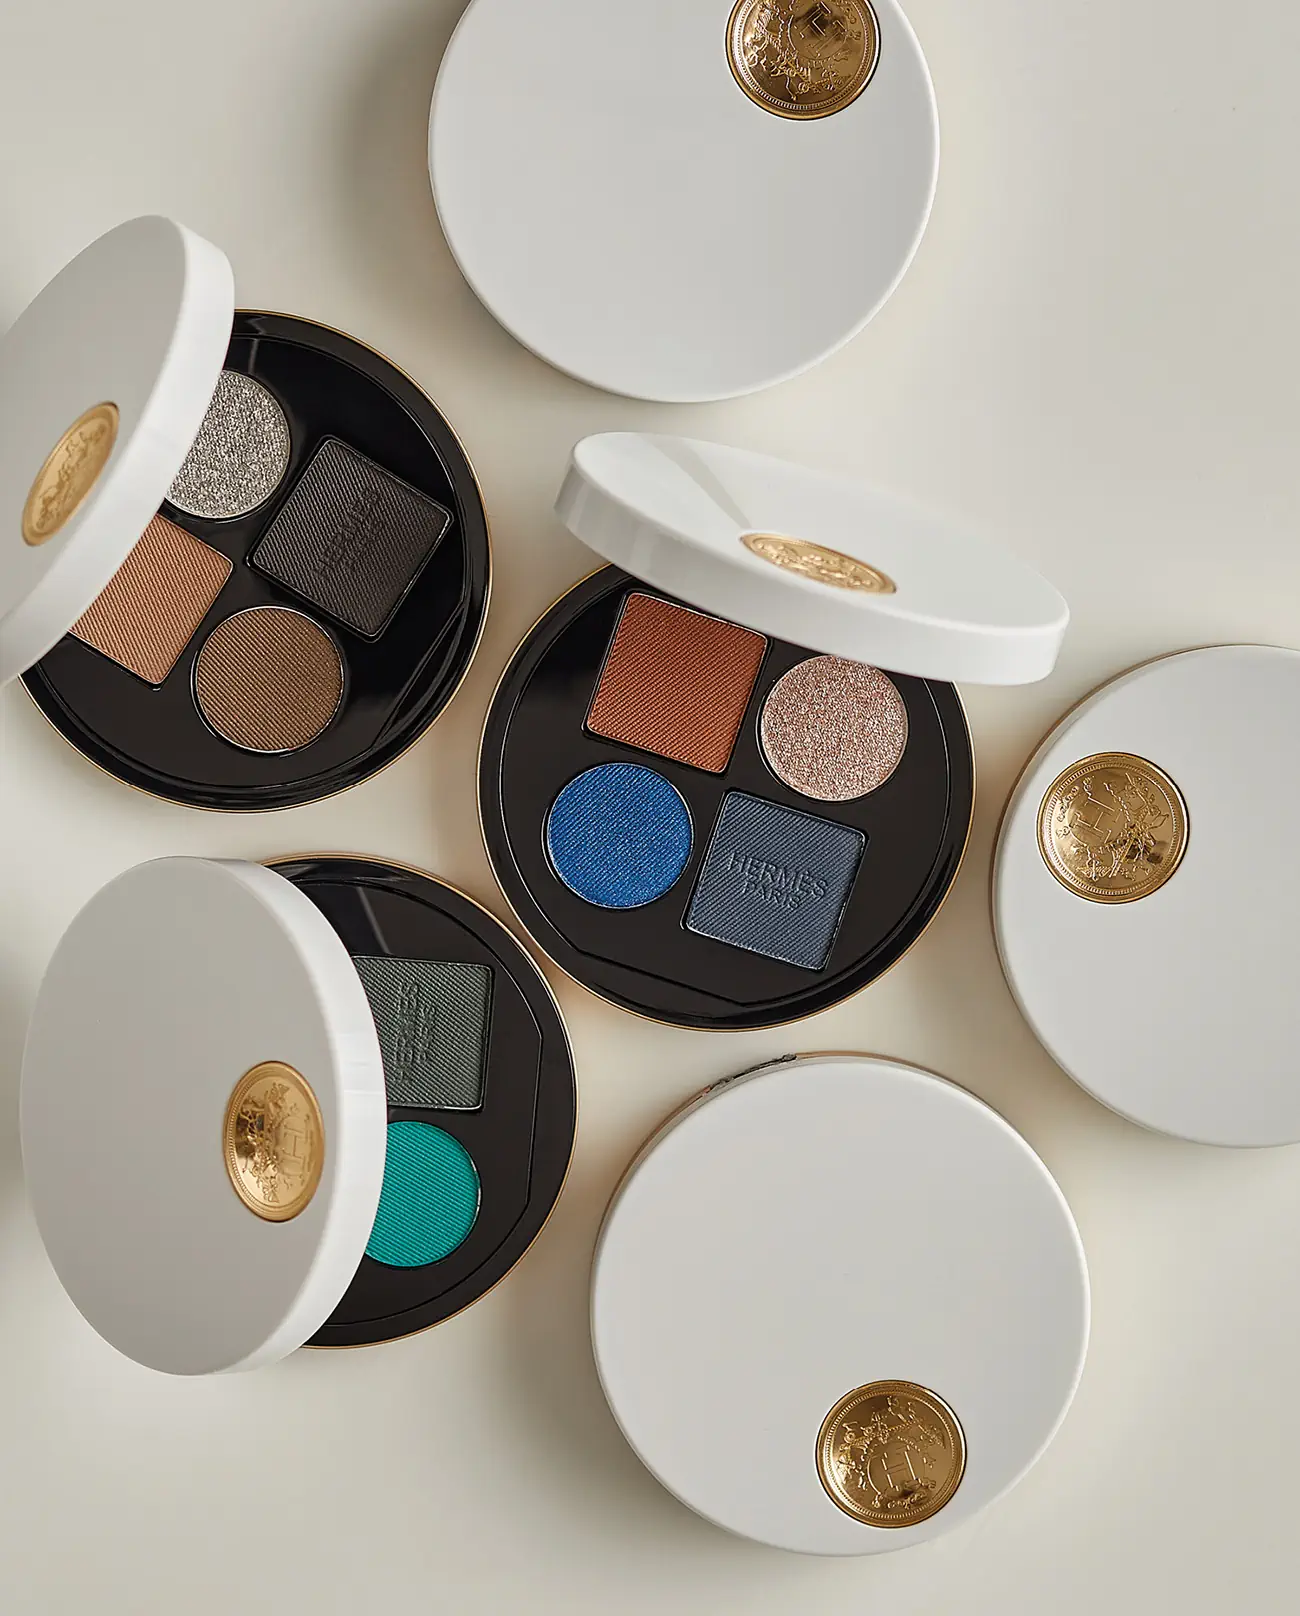 Hermès elevates eye make-up & tools with "Le Regard" collection